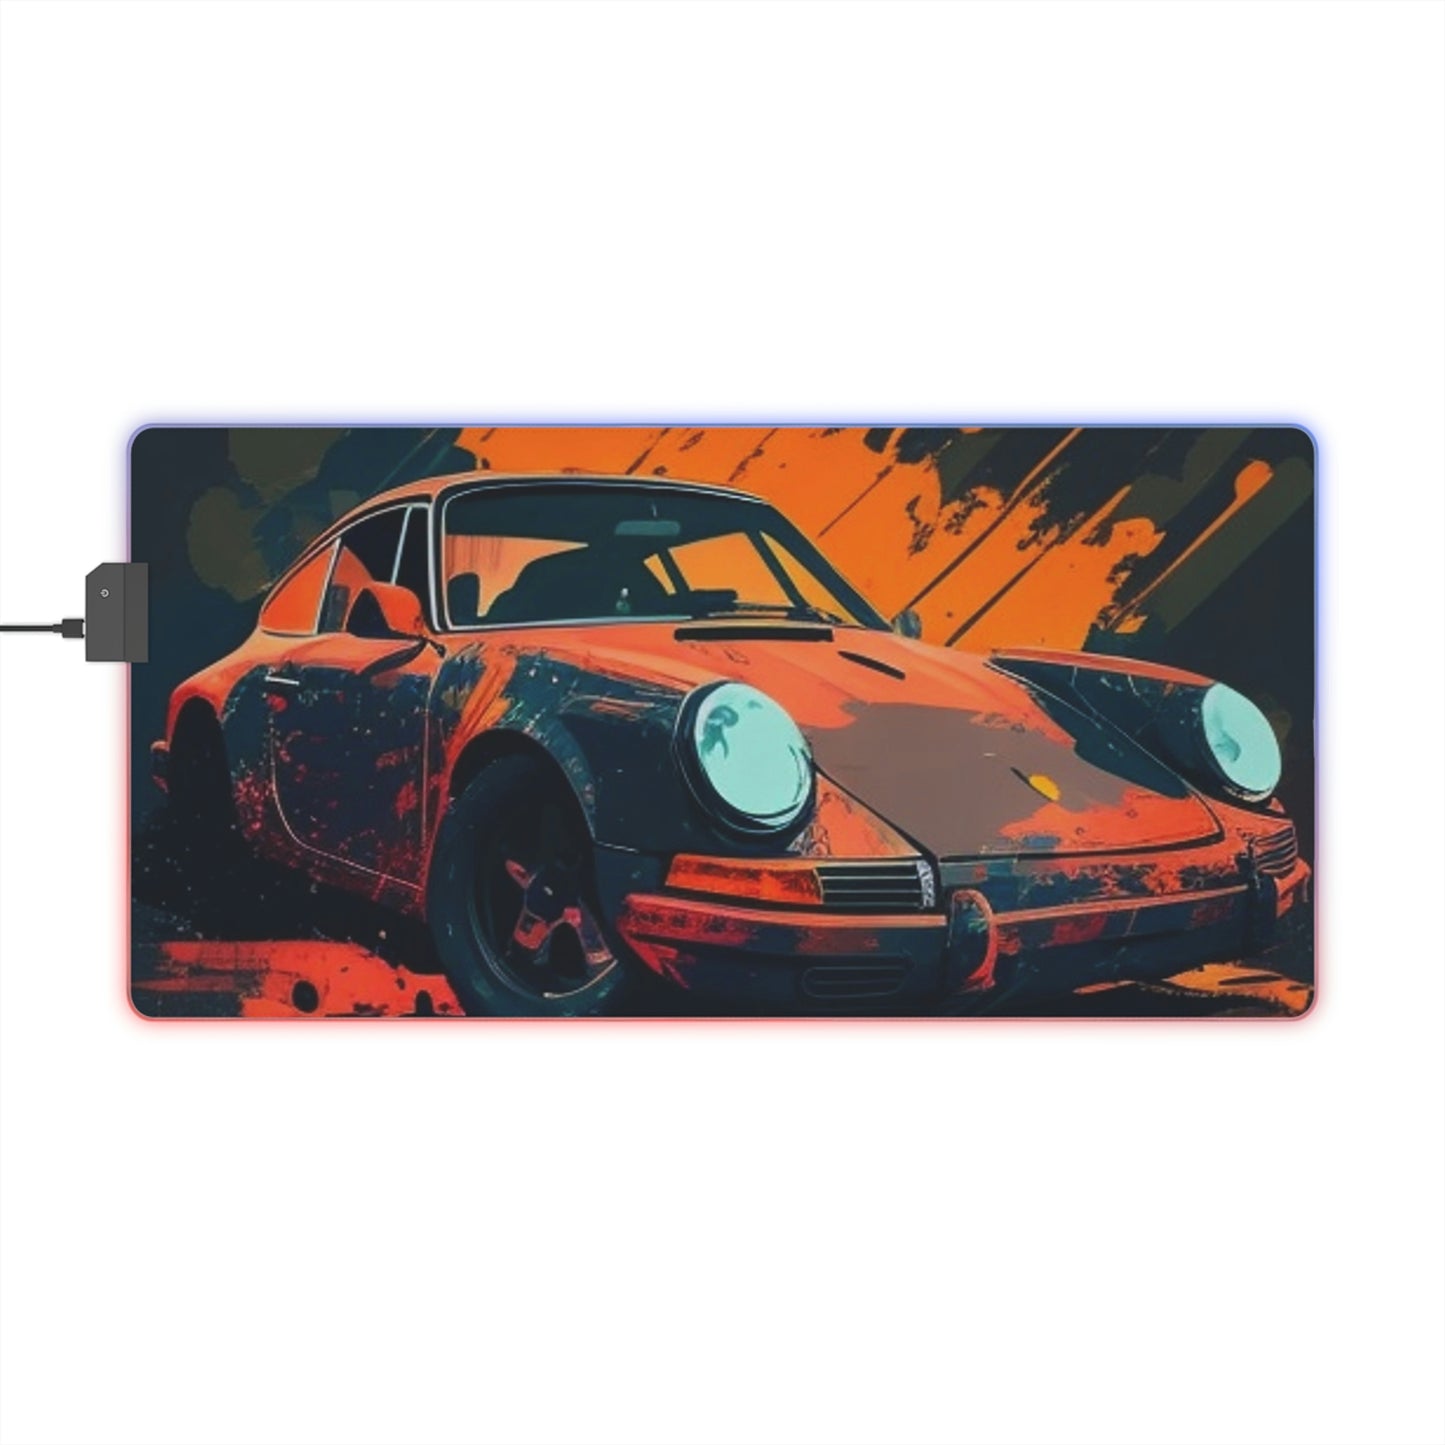 LED Gaming Mouse Pad Porsche Abstract 3